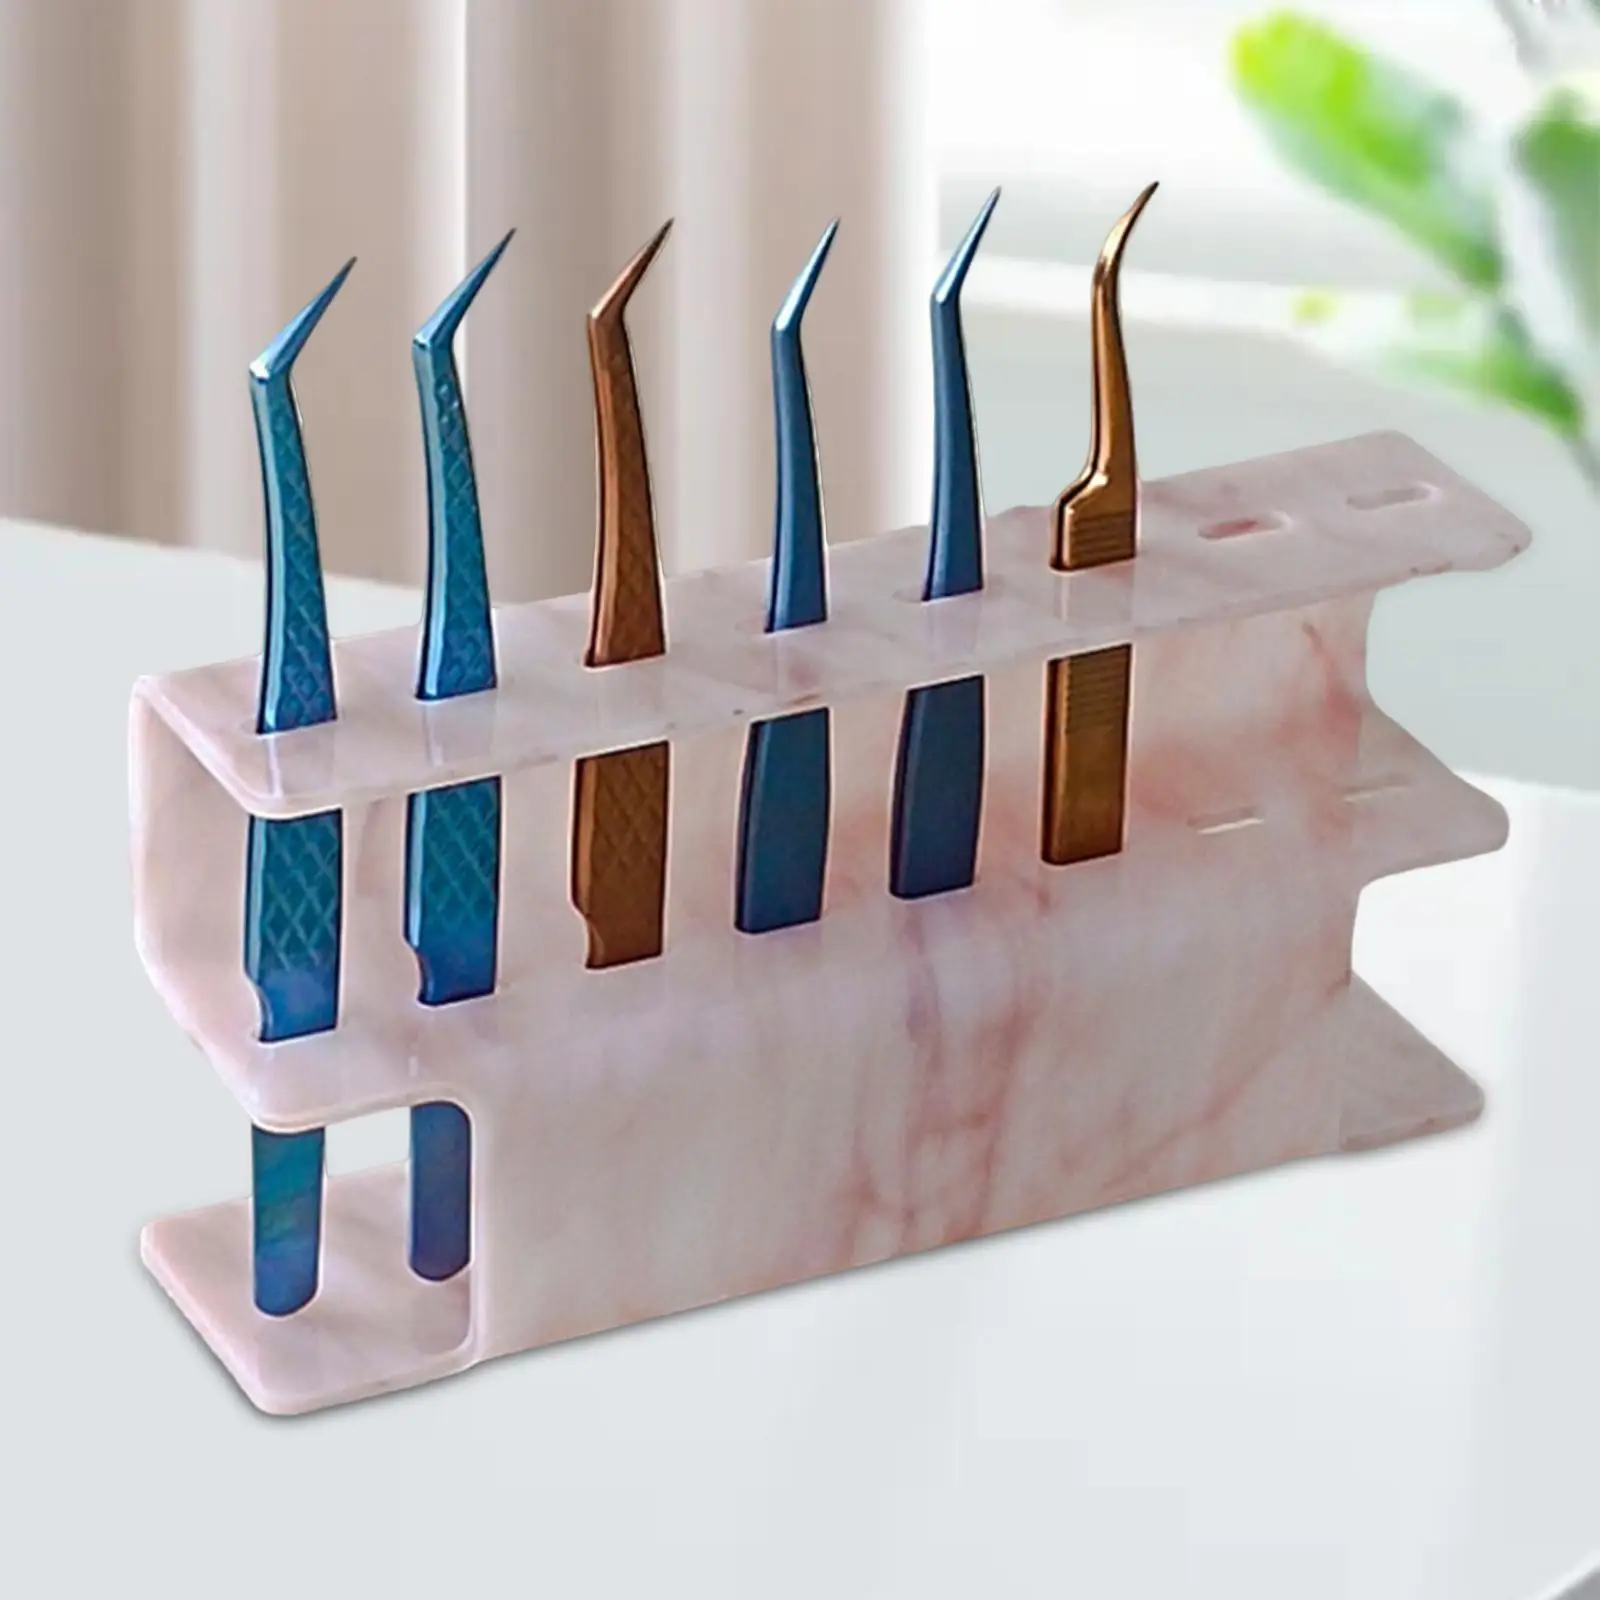 8 Holes  Stand for Salon Pink Marble Make up Supplies Acrylic  Storage Holder  Holder s Shelf Holder for Home